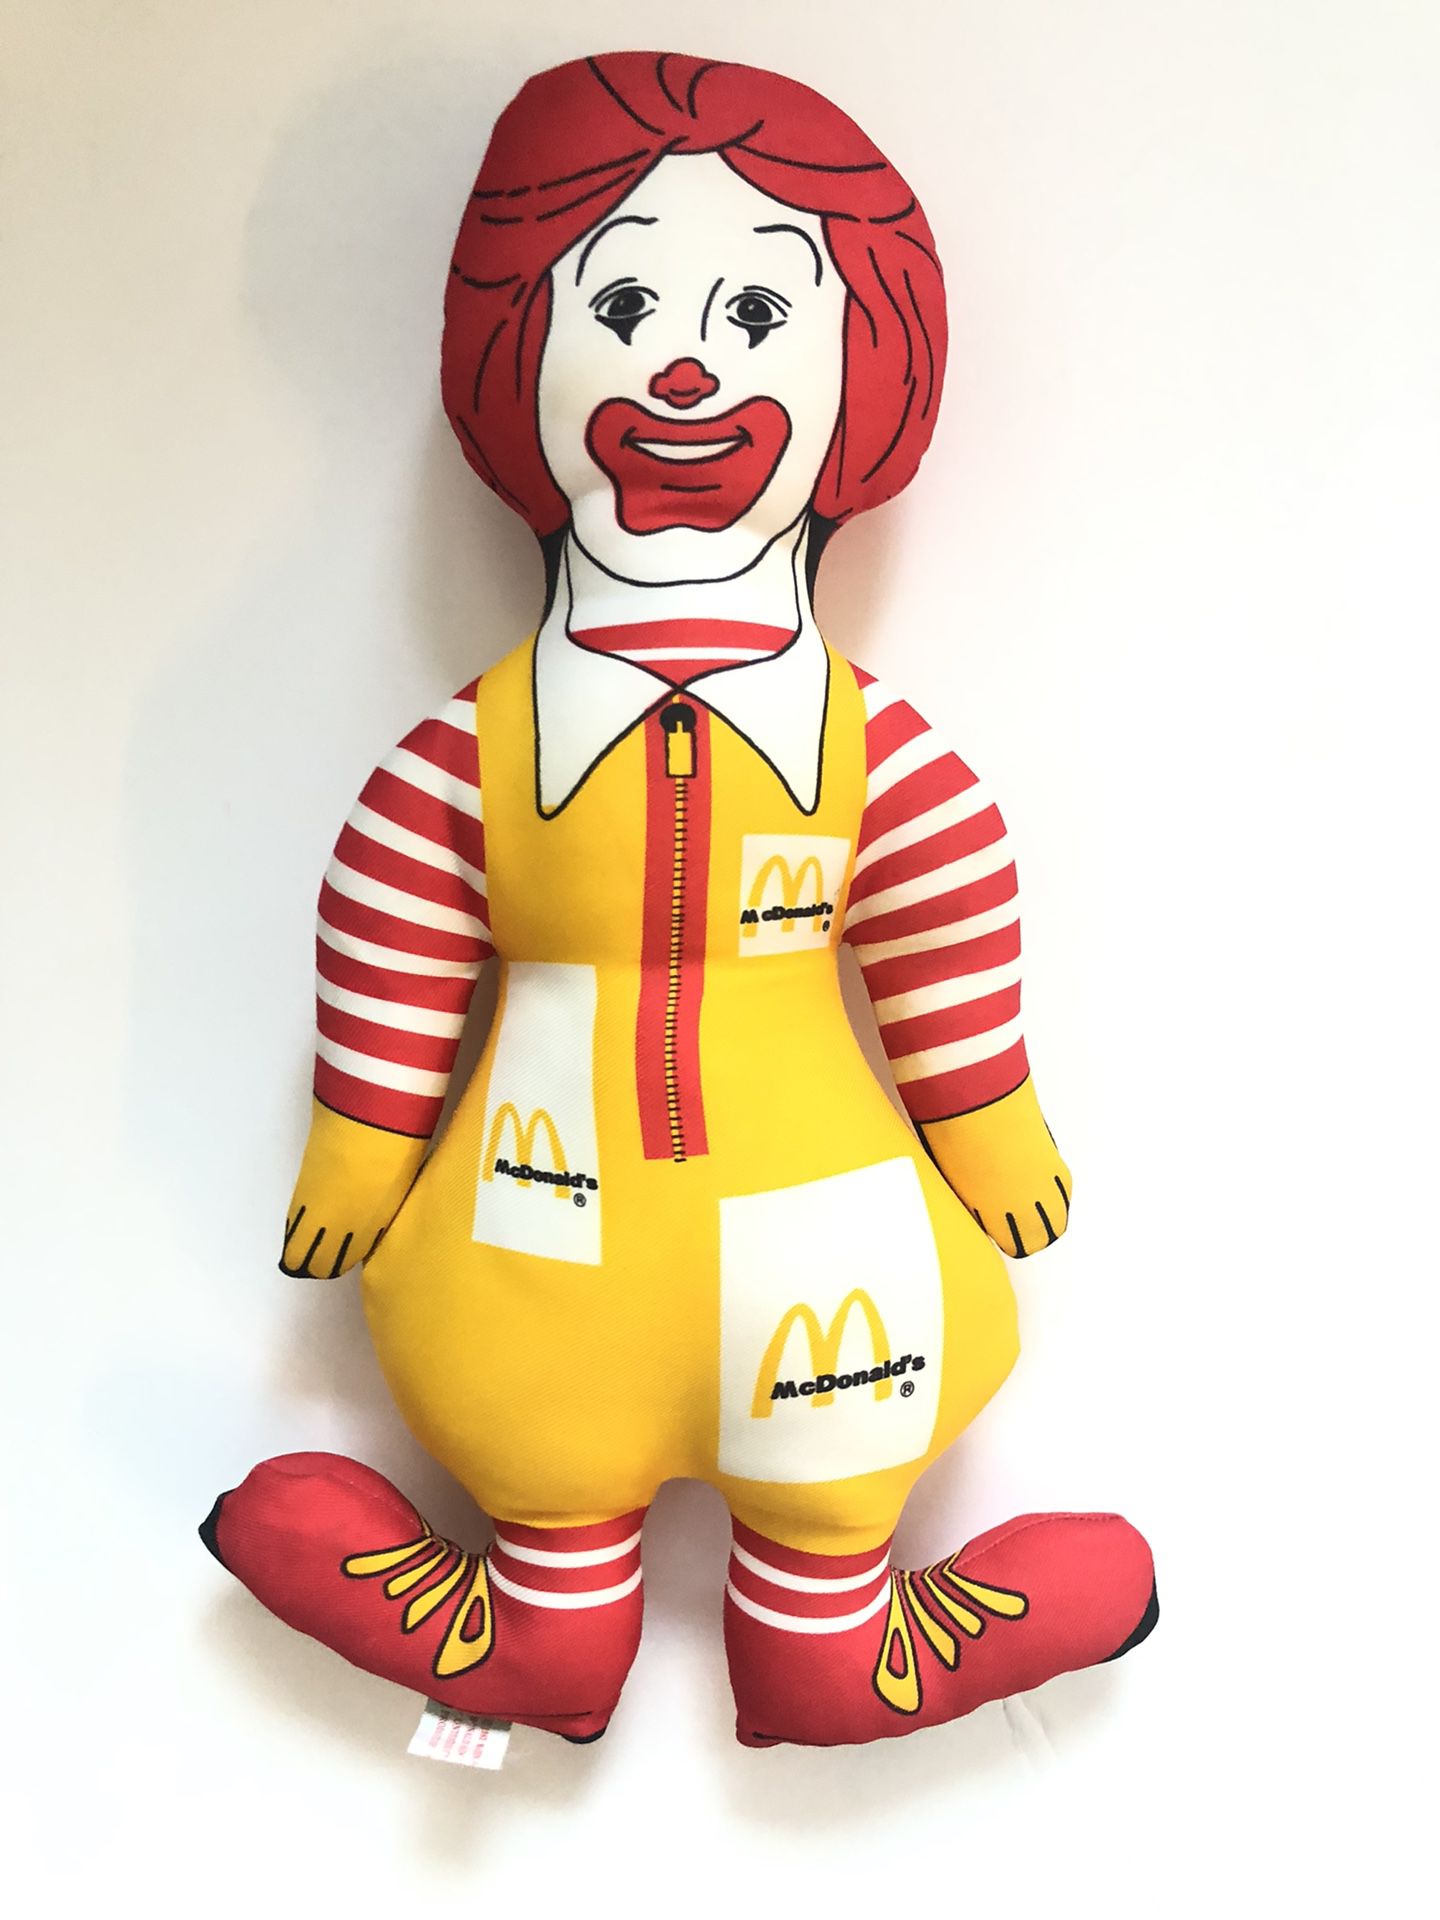 Authentic Ronald McDonald and McDonald’s french fry bag